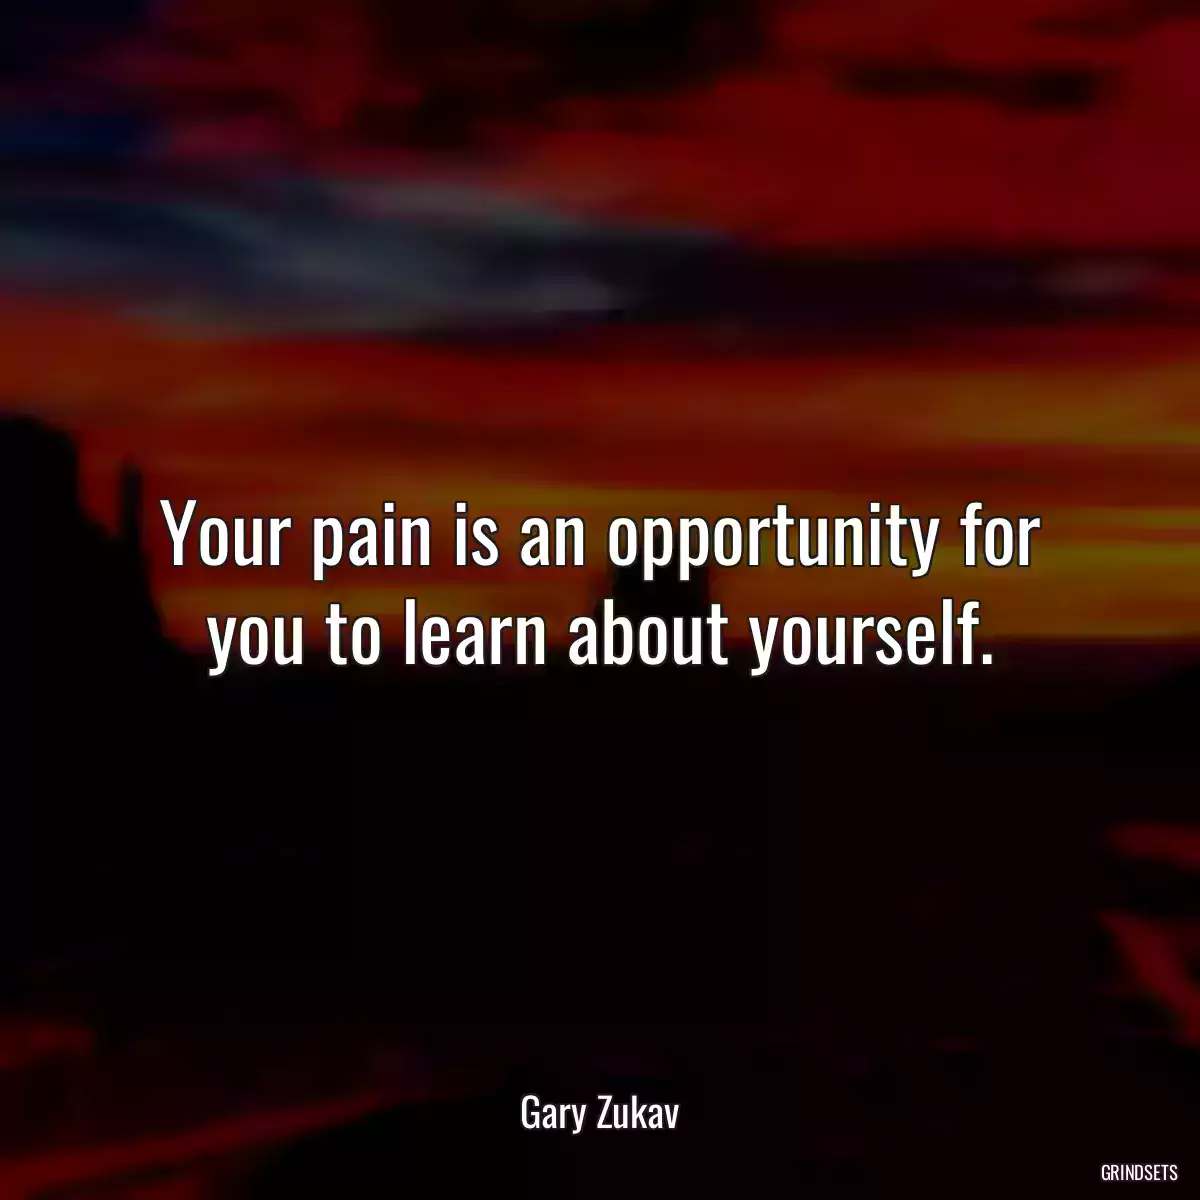 Your pain is an opportunity for you to learn about yourself.